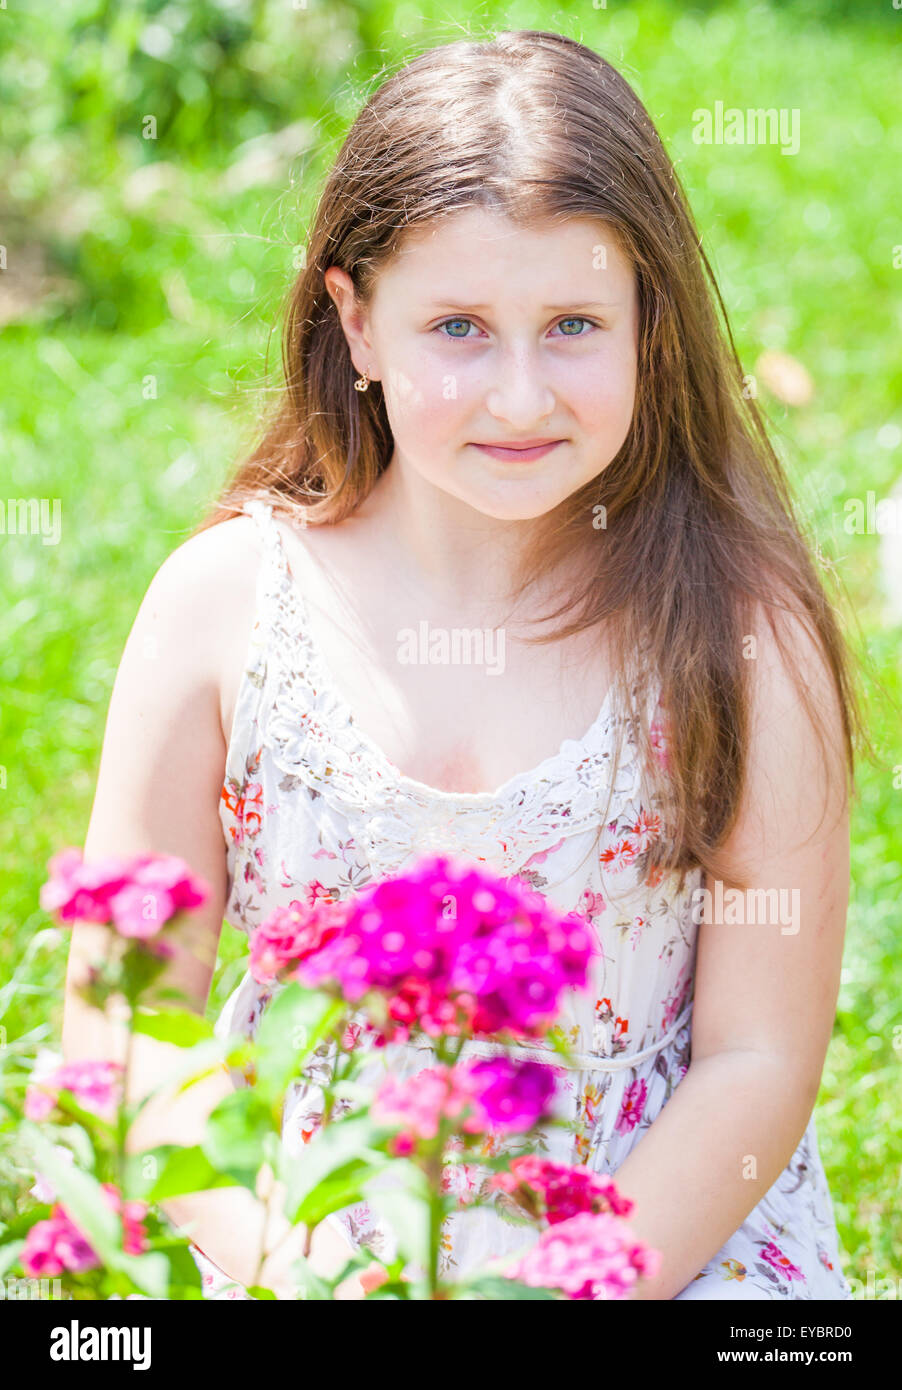 Portrait of a 10 year old girl enjoying the flower garden at home. Stock Photo